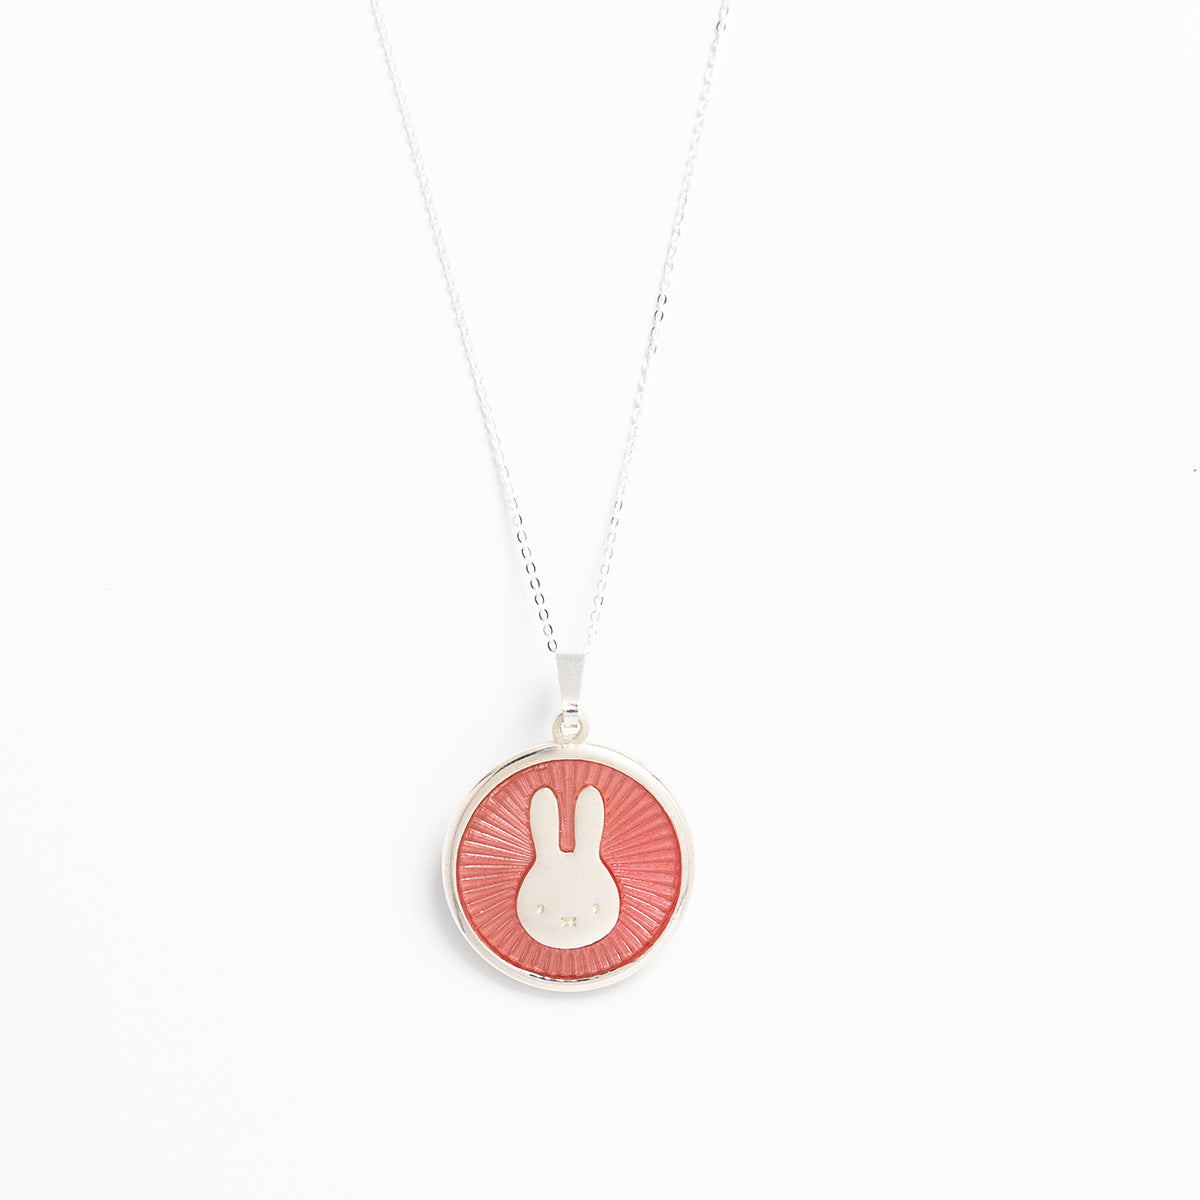 Miffy Red Enamel Necklace 